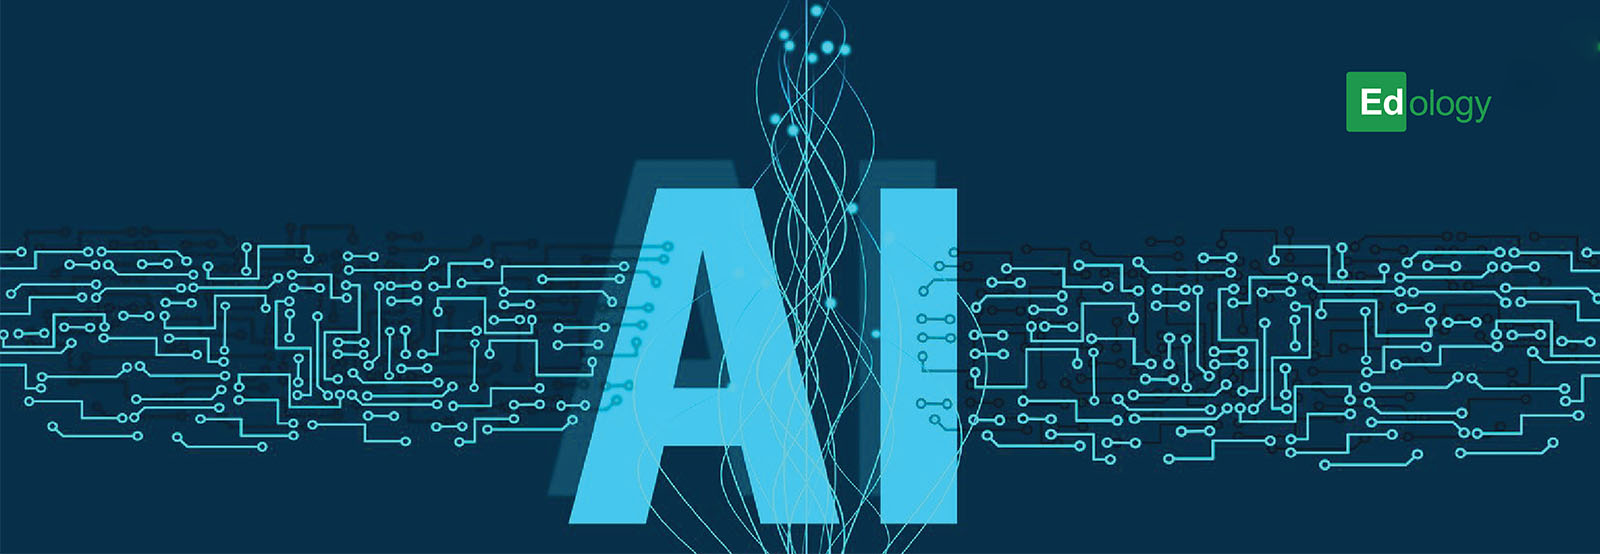 How can I expand my expertise in Artificial Intelligence and Machine Learning